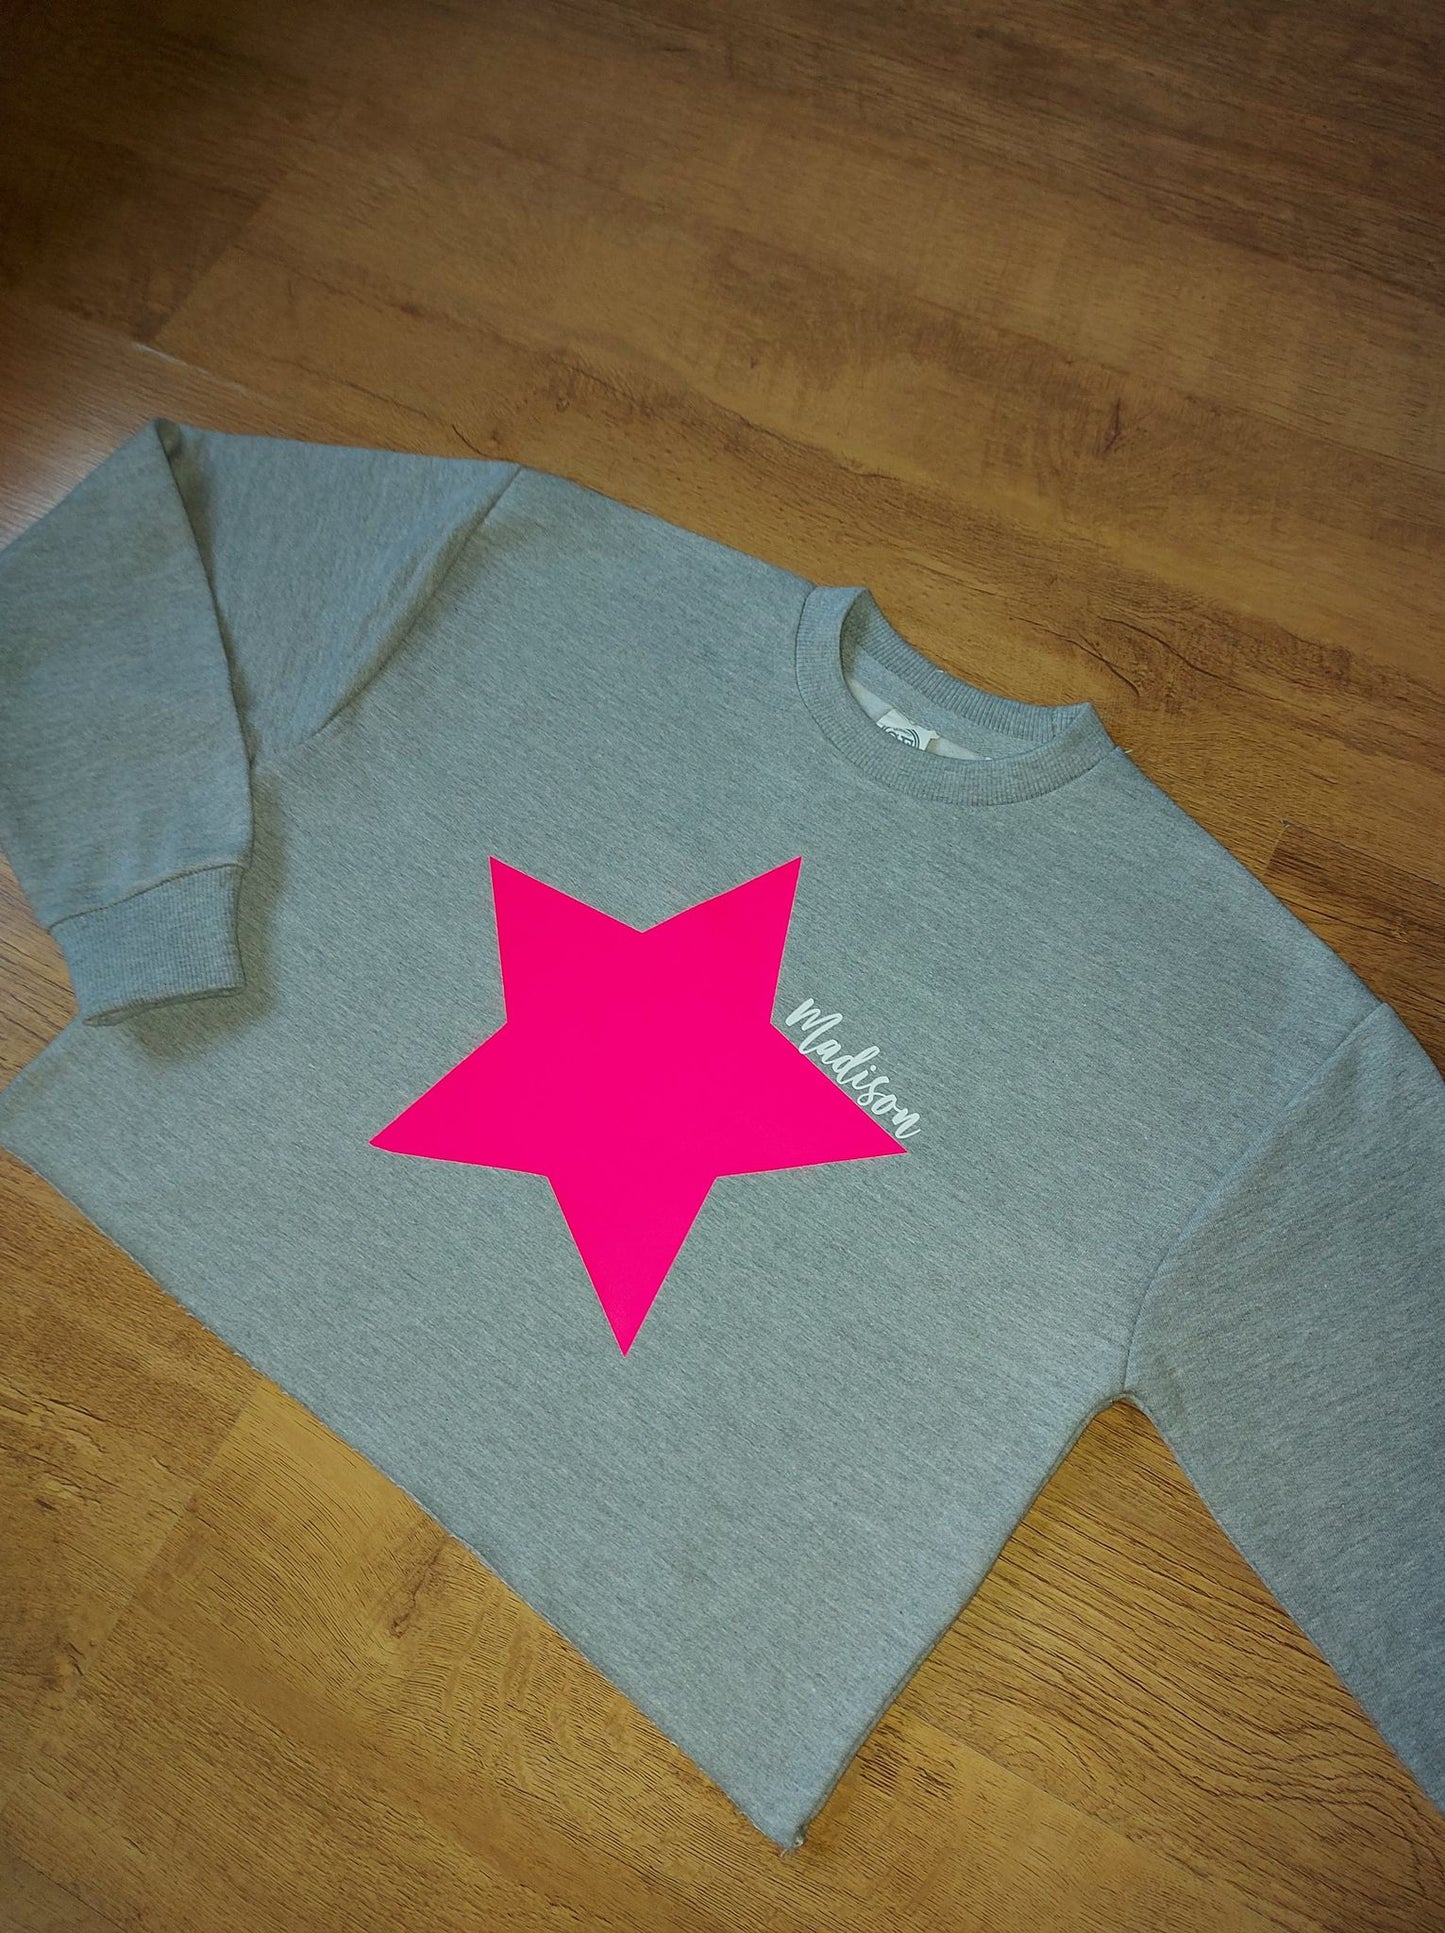 Childs Cropped Sweatshirt - with personalised star design